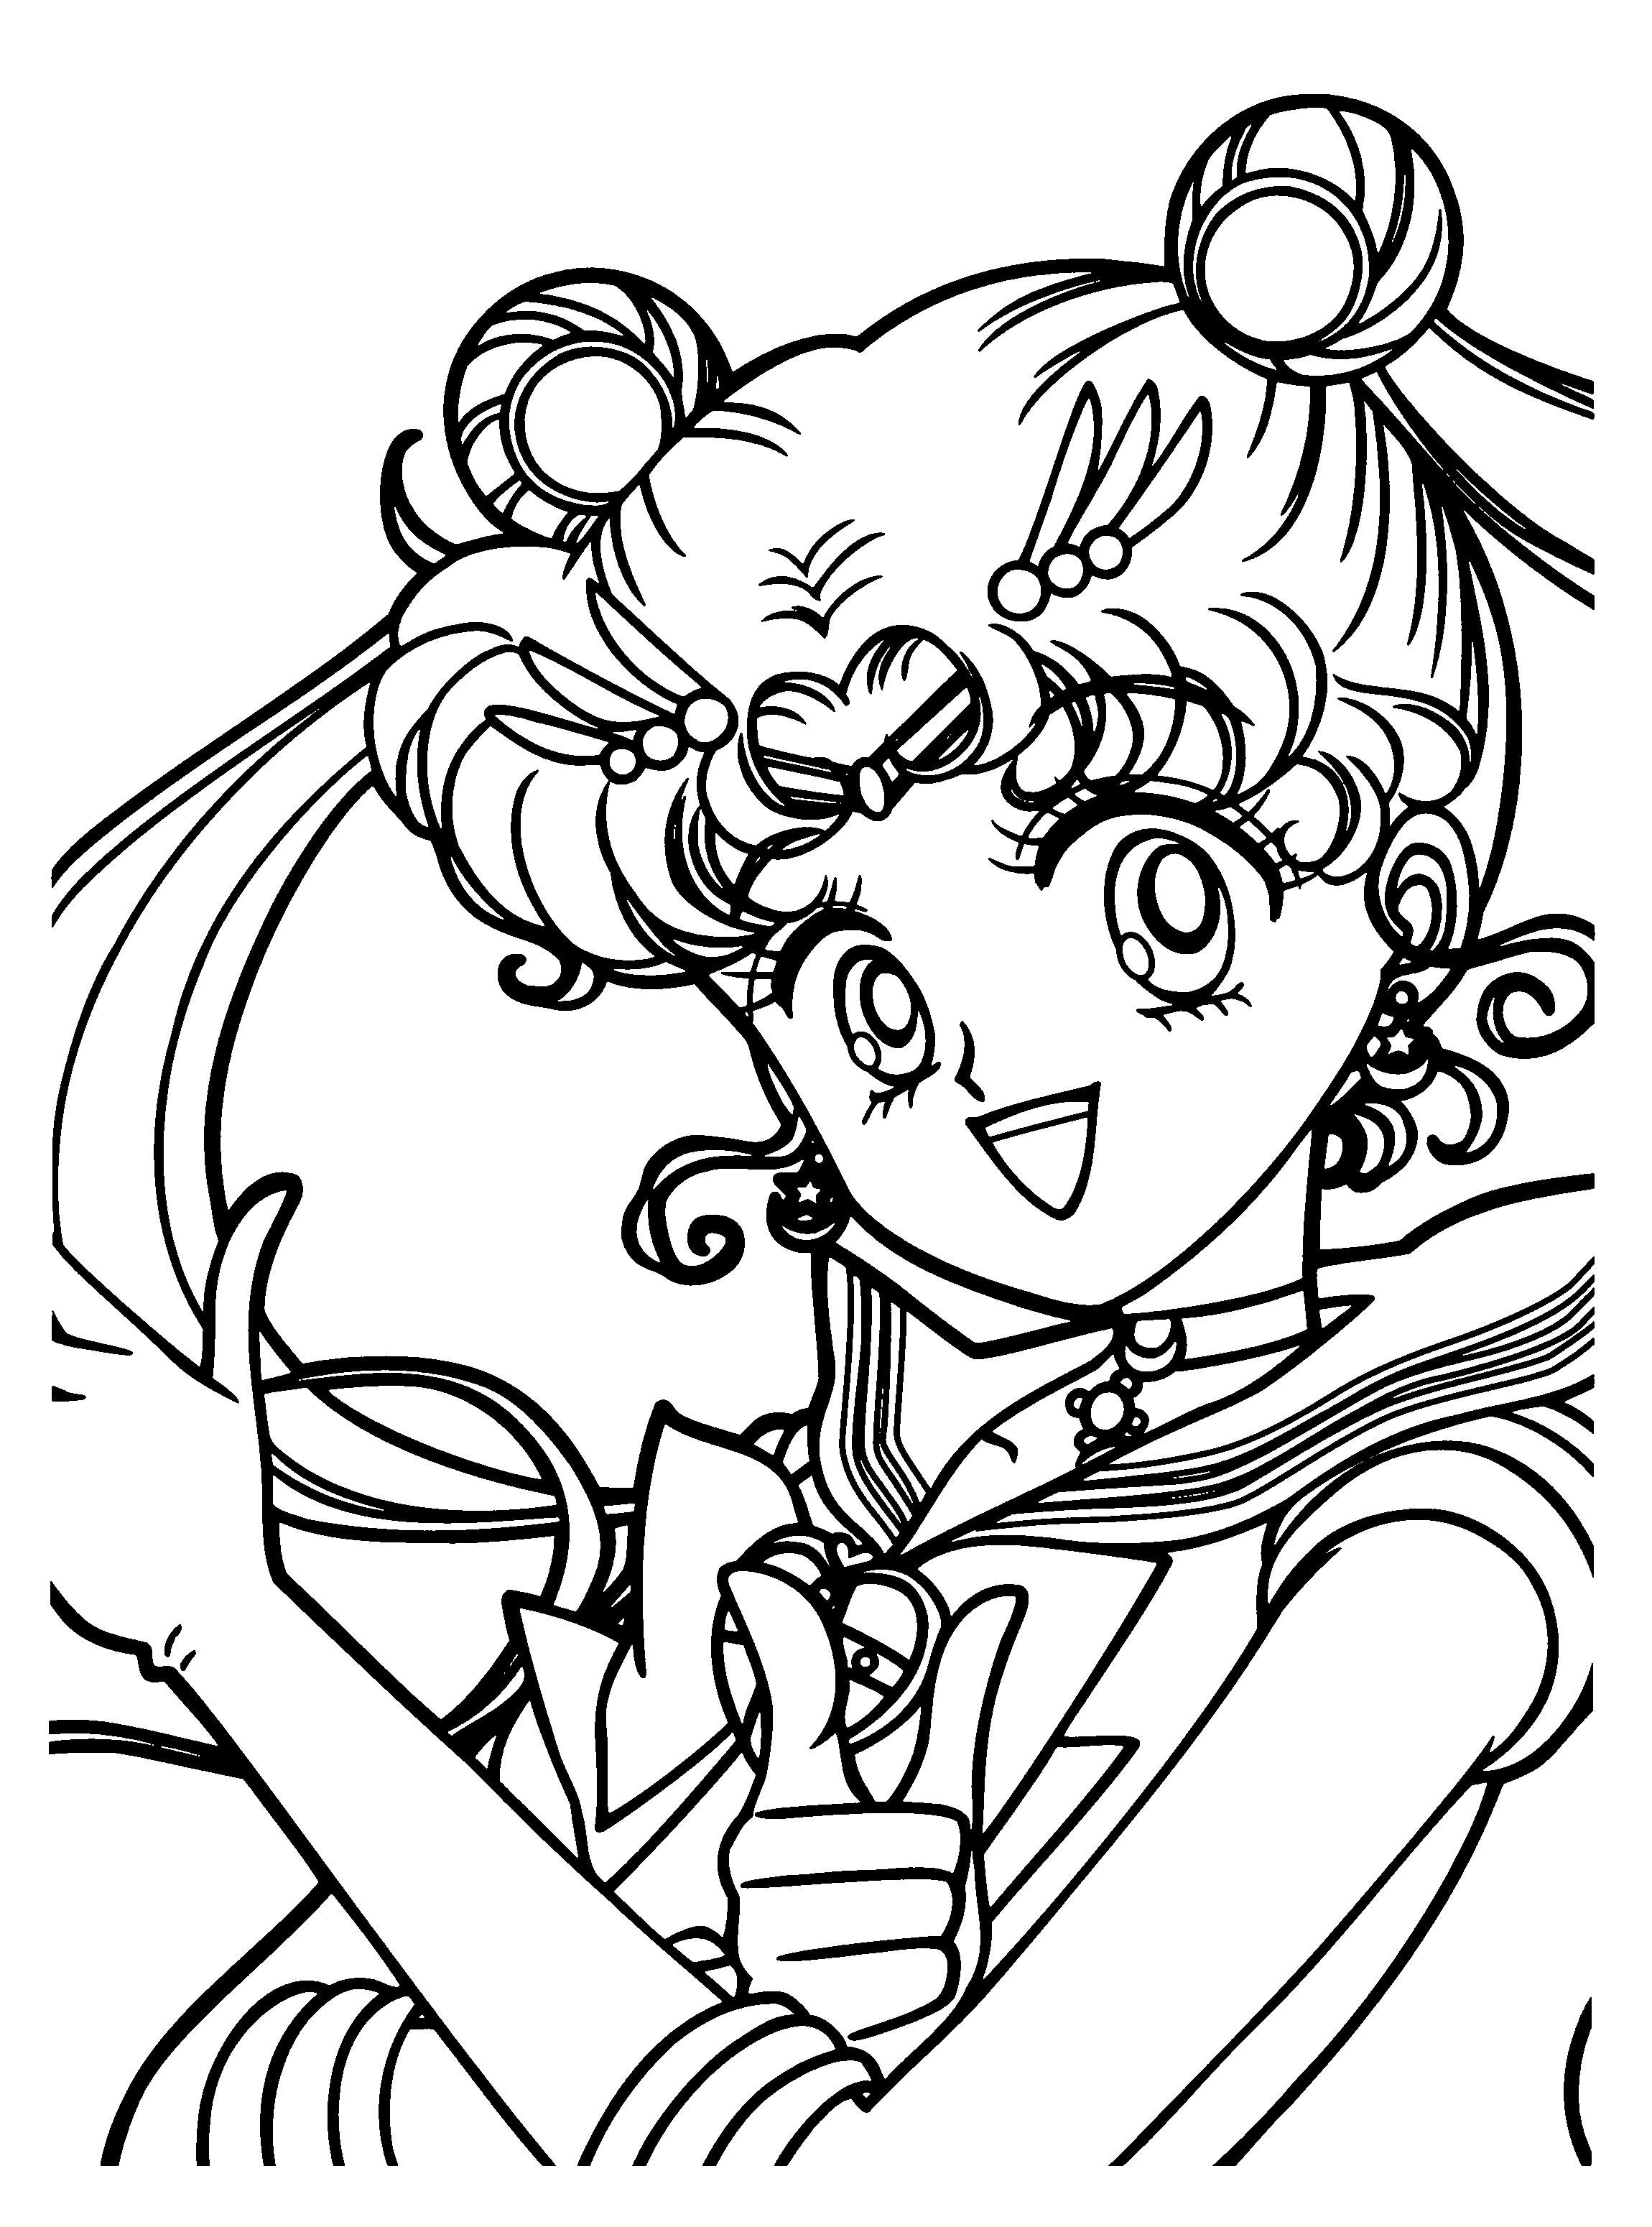 Sailor Moon Black and White Logo - ▷ Coloring Pages Sailor Moon: Animated Images, Gifs, Pictures ...